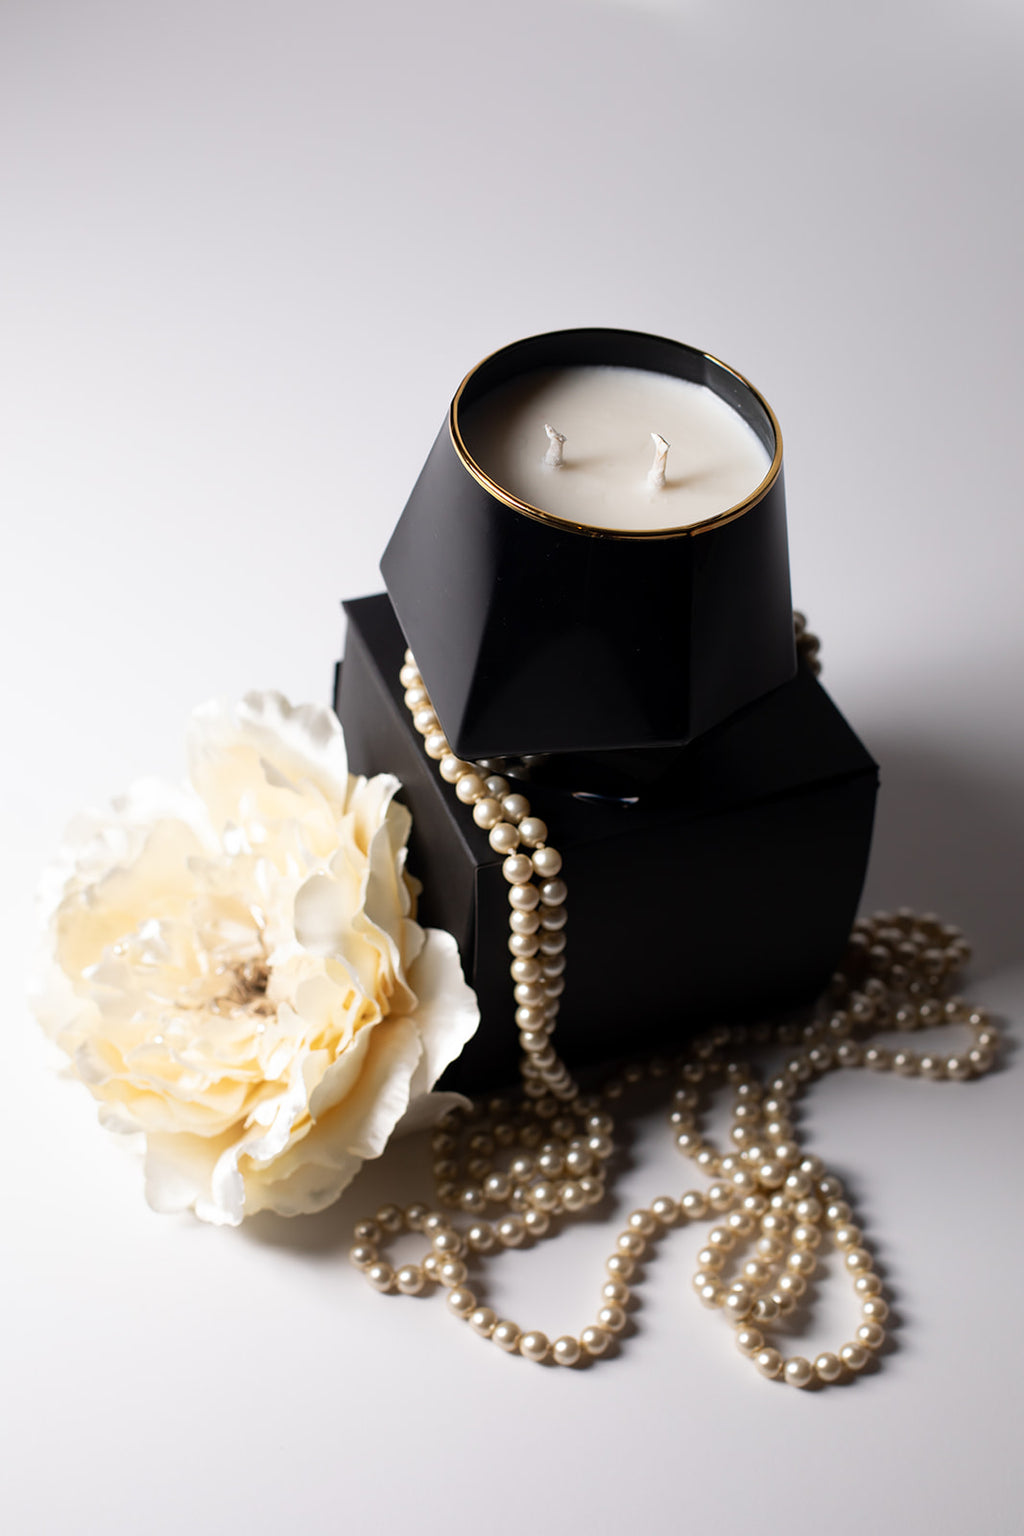 'Noir' Luxury Scented Soy Candle